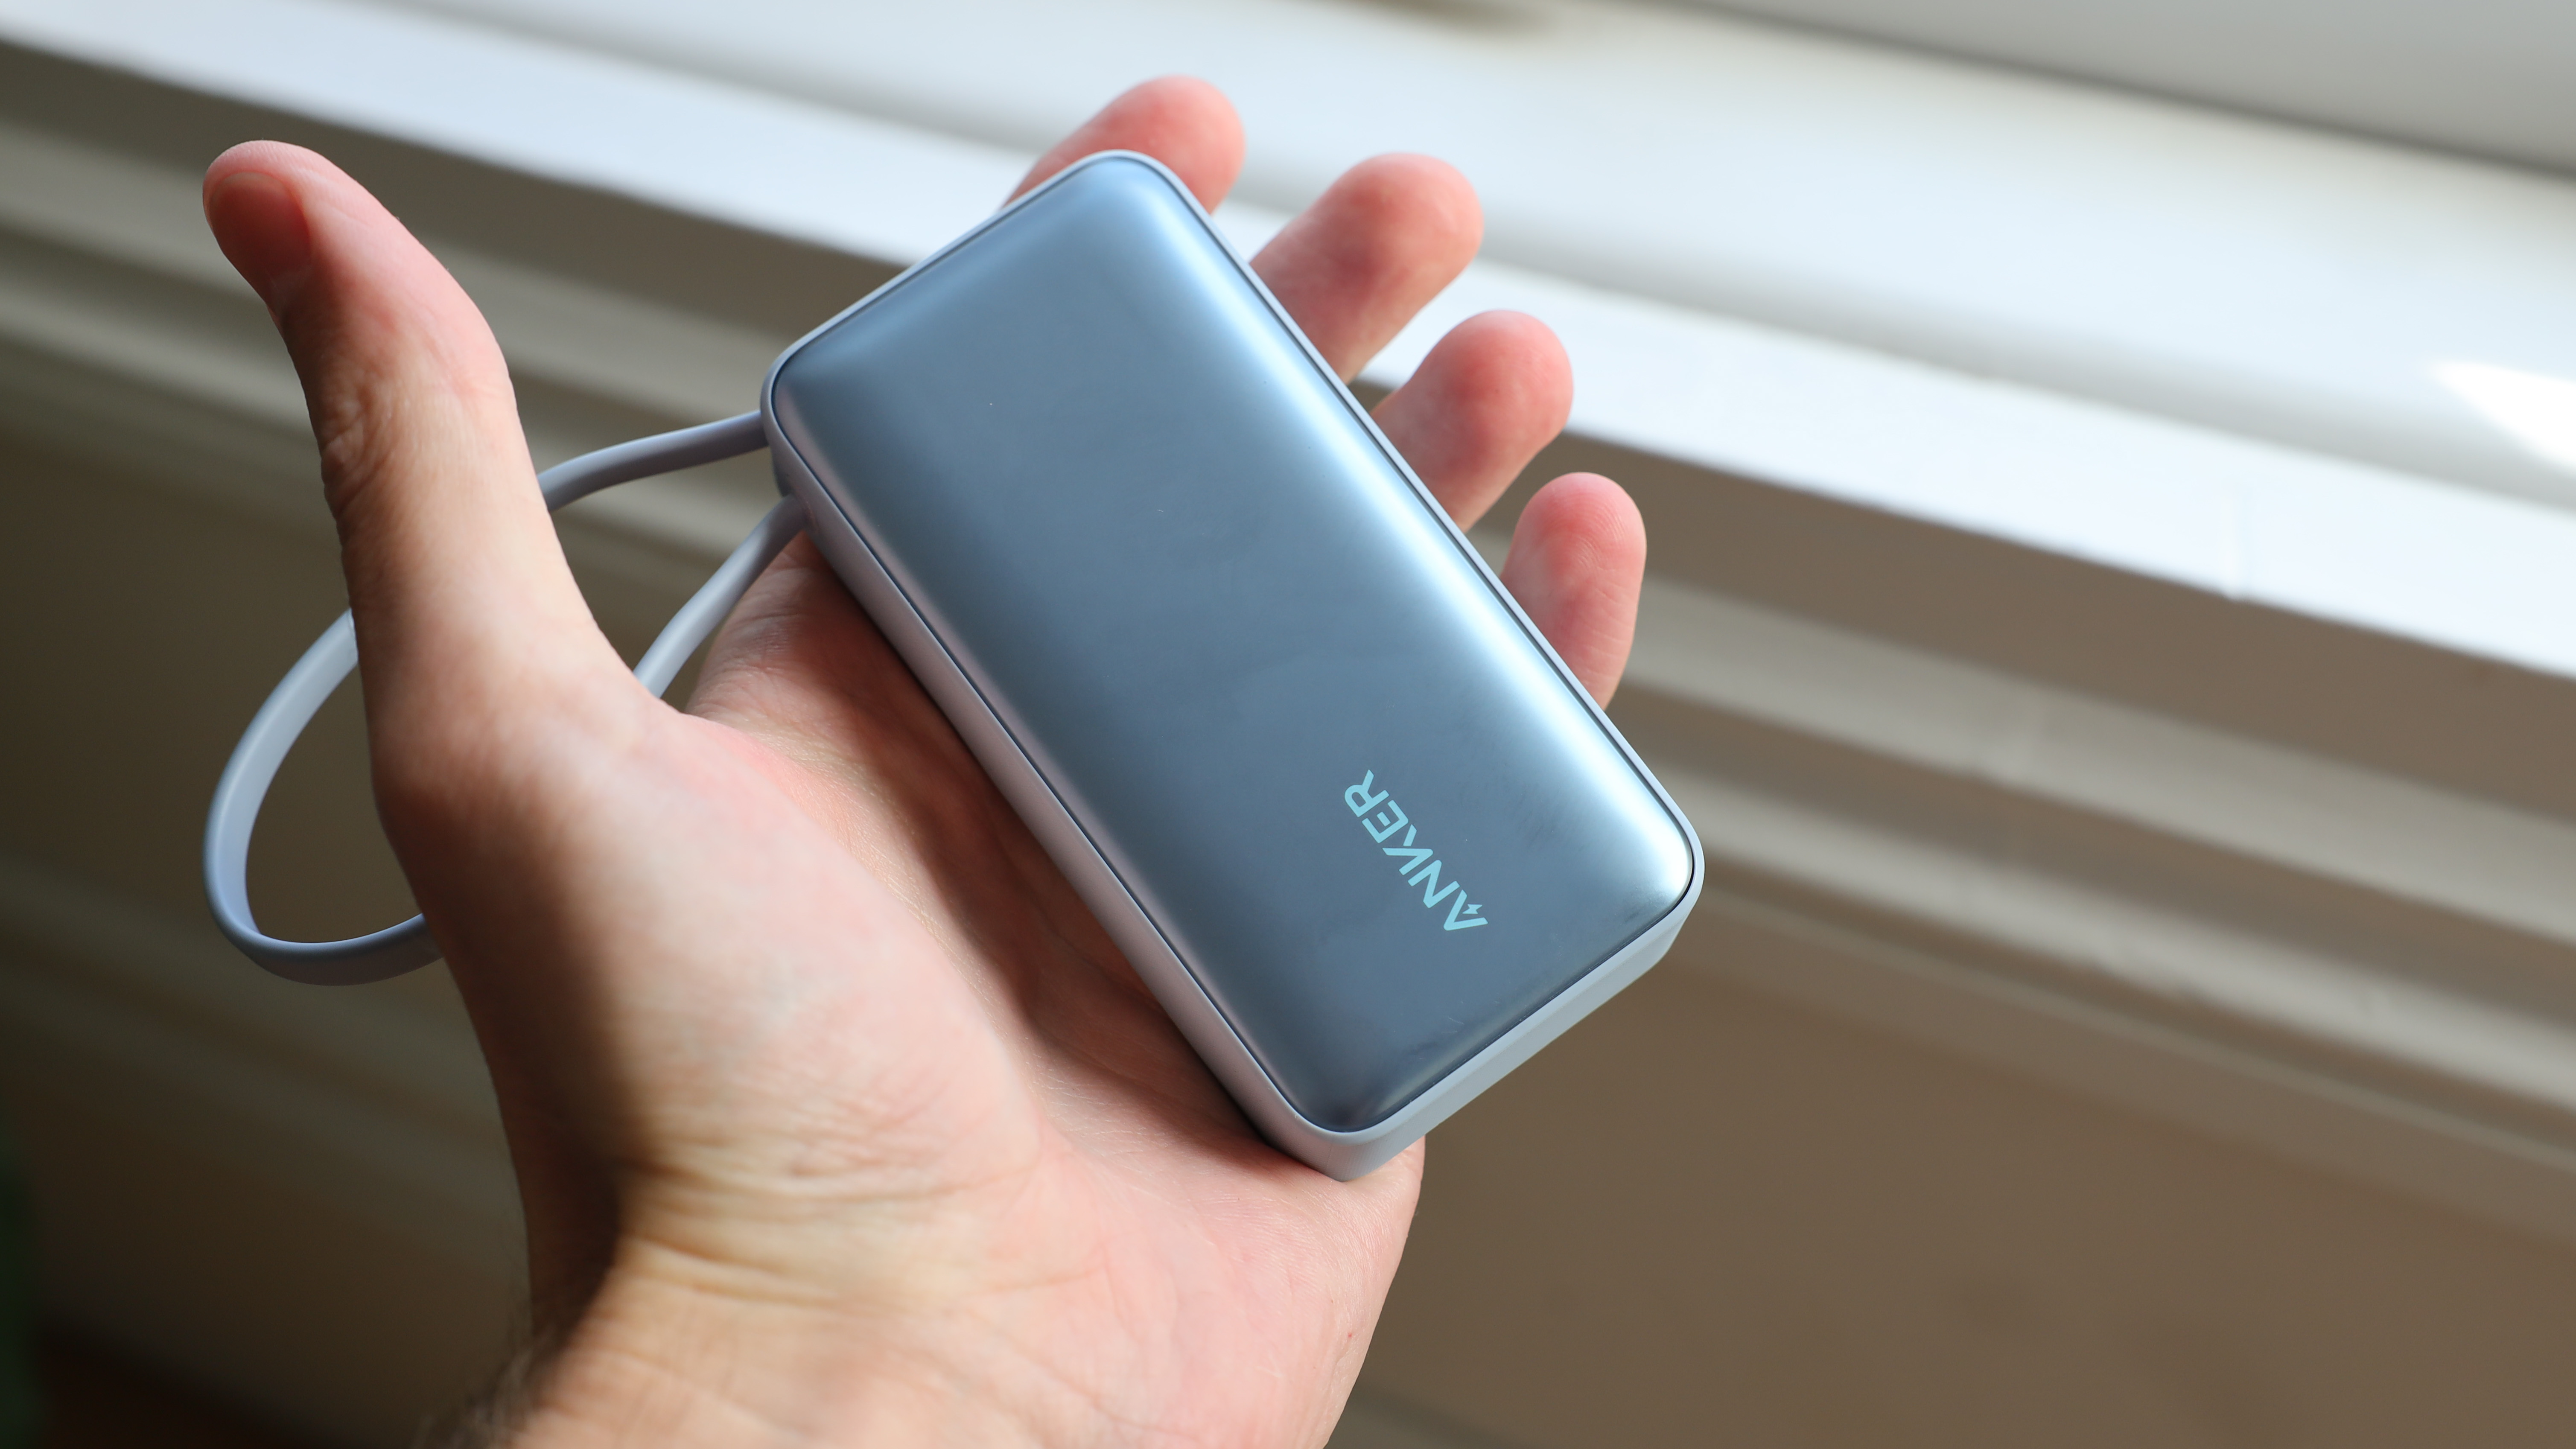 Review of 'Anker Nano Power Bank (22.5W, Built-In USB-C Connector